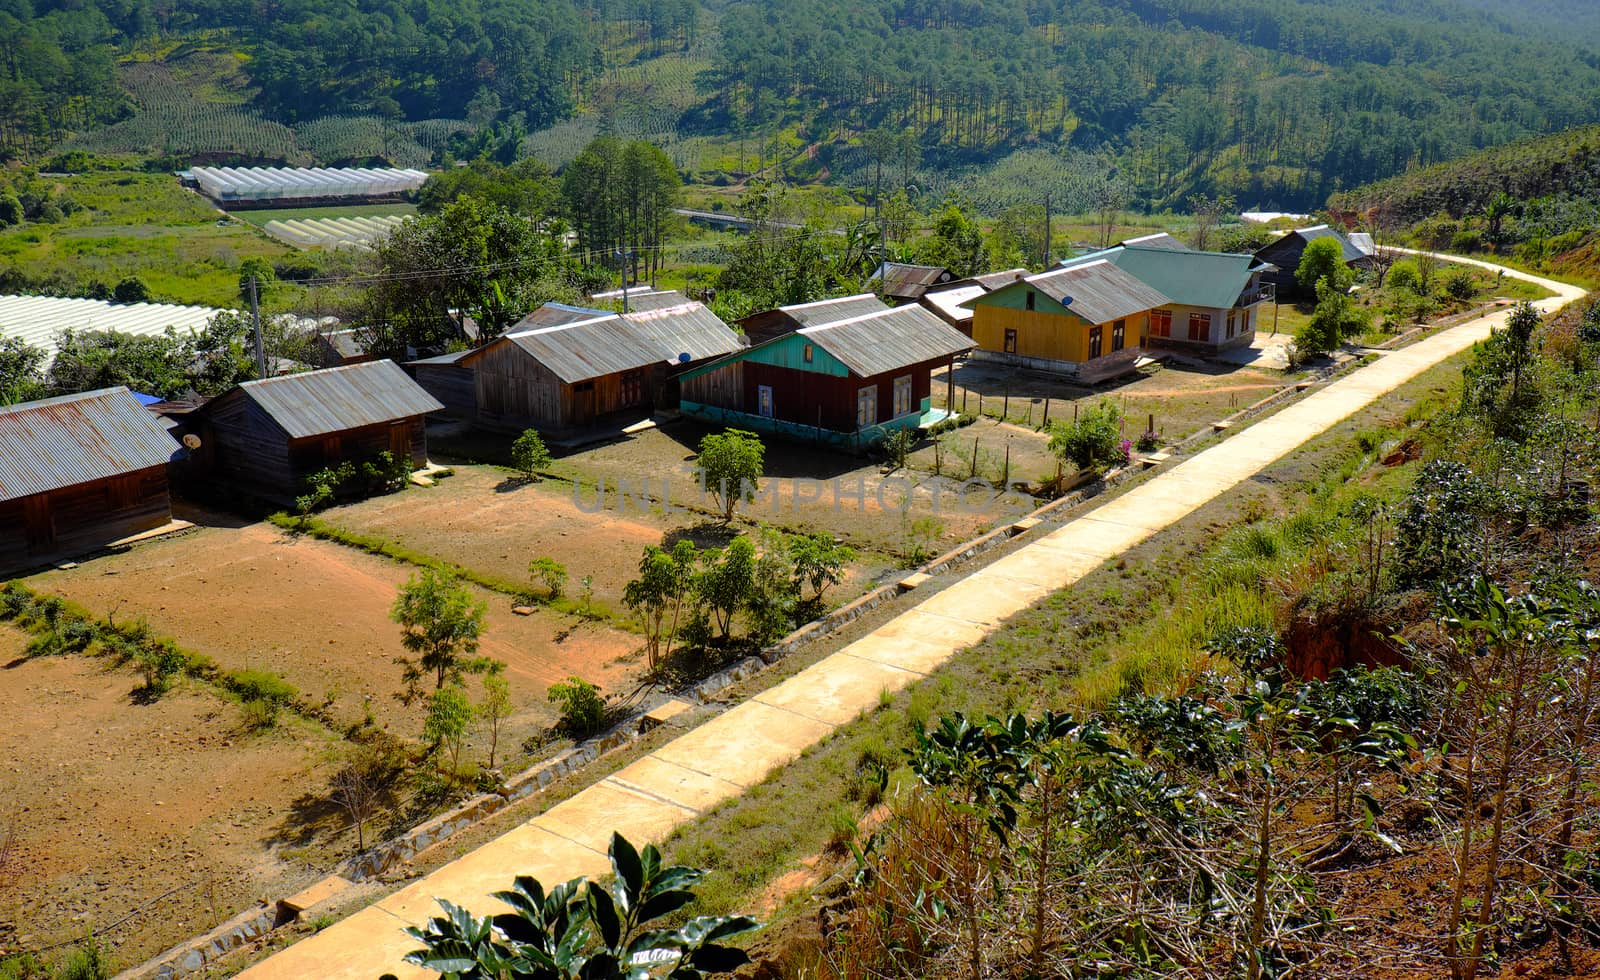 DA LAT, VIET NAM- DEC 30: Amazing scene at Dalat countryside, group of wooden house among agriculture field, housing for settle of poor Vietnamese, landscape of poverty residence, Vietnam, Dec 30,2015